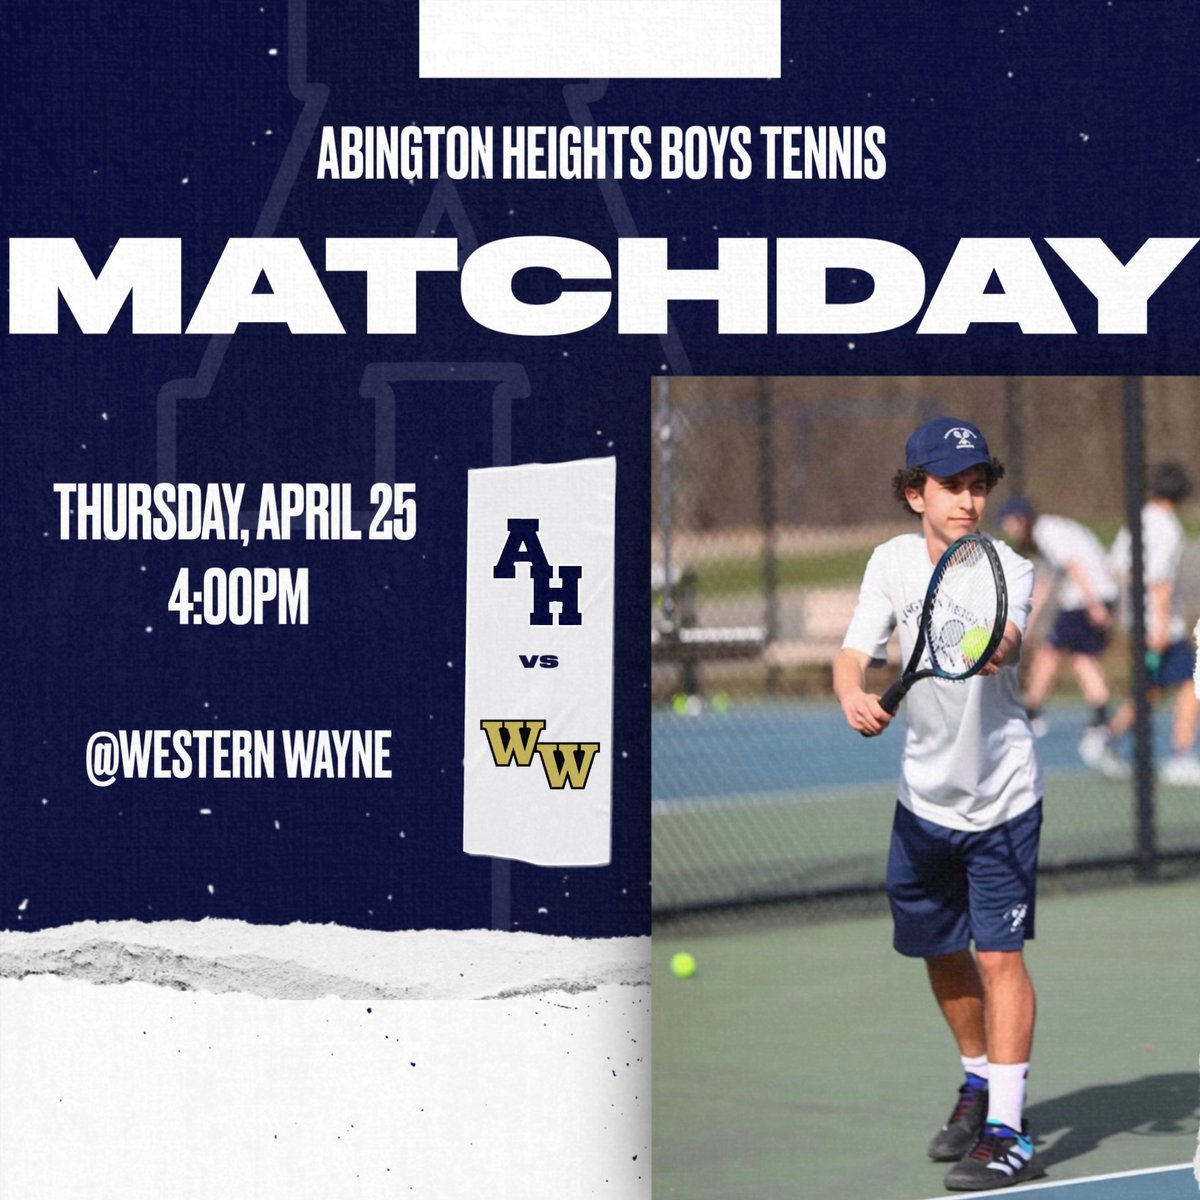 The comets are taking the trip down to Wedtern Wayne today for the final regular season match!

#Gocomets☄️